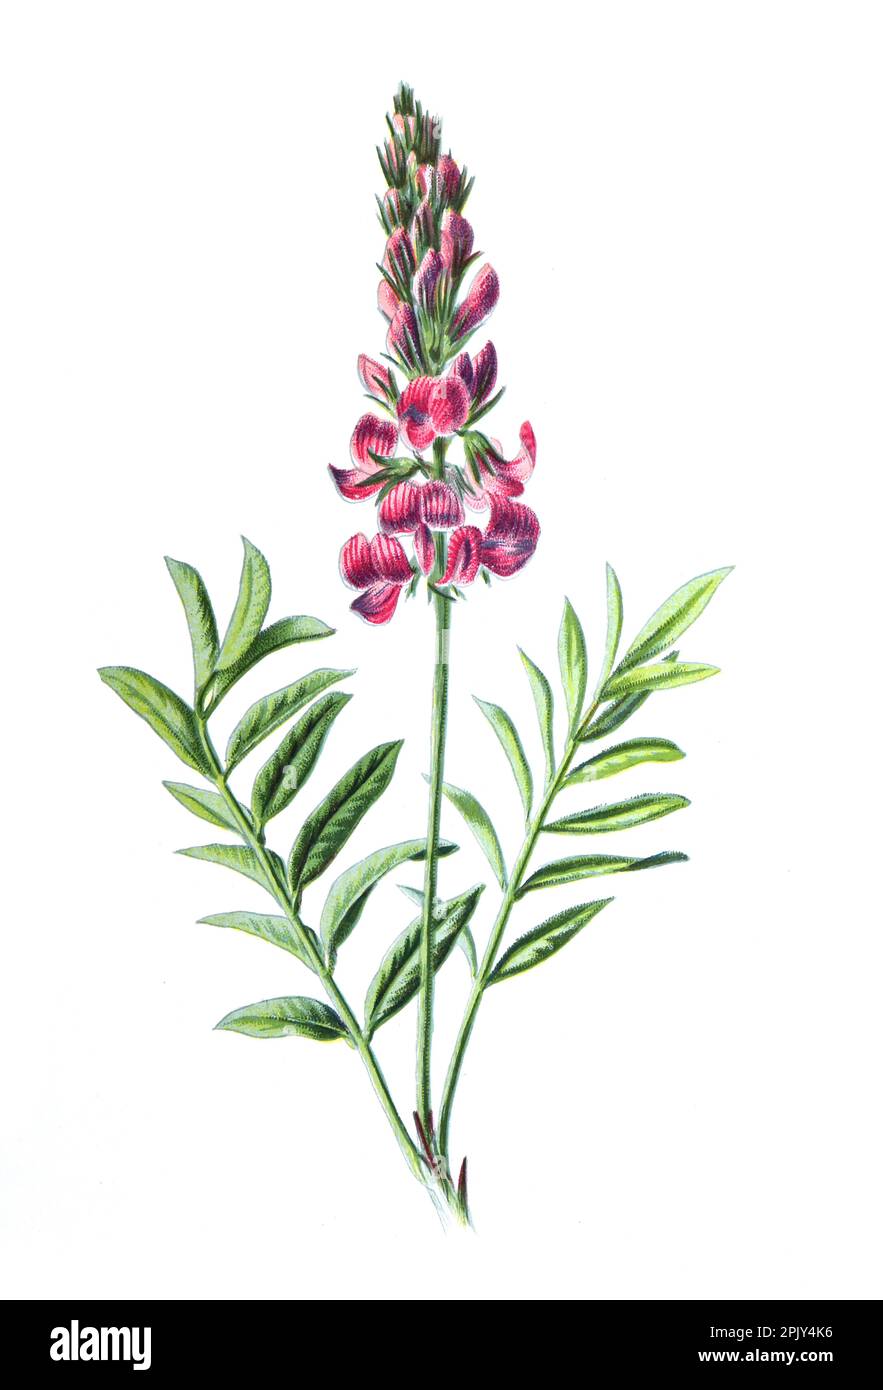 Onobrychis viciifolia, also known as Onobrychis sativa or common sainfoin flower. Vintage hand drawn wild field flowers illustration. Stock Photo